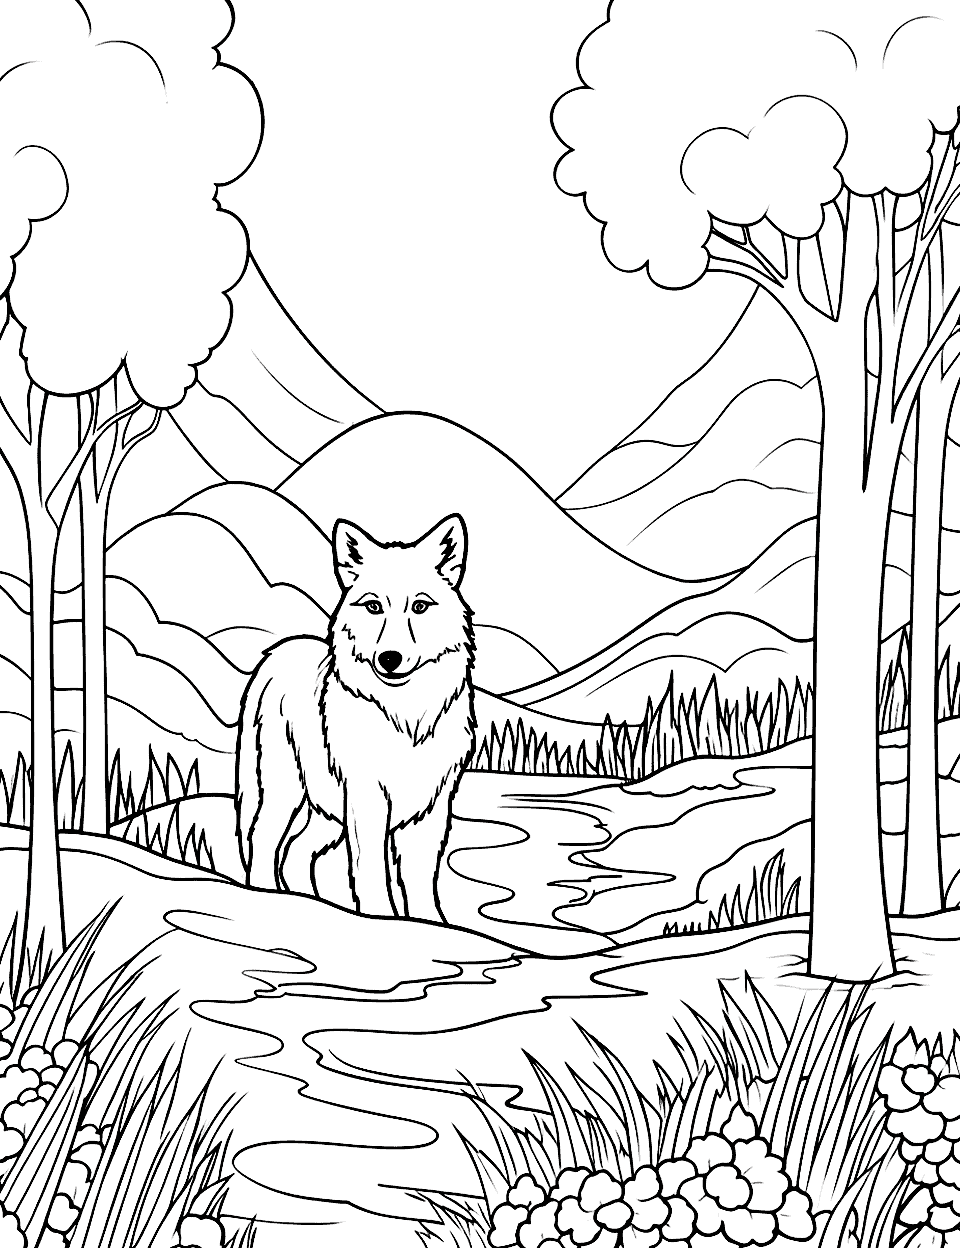 Lone Wolf in the Woods Nature Coloring Page - A single wolf standing in a forest with tall trees all around.